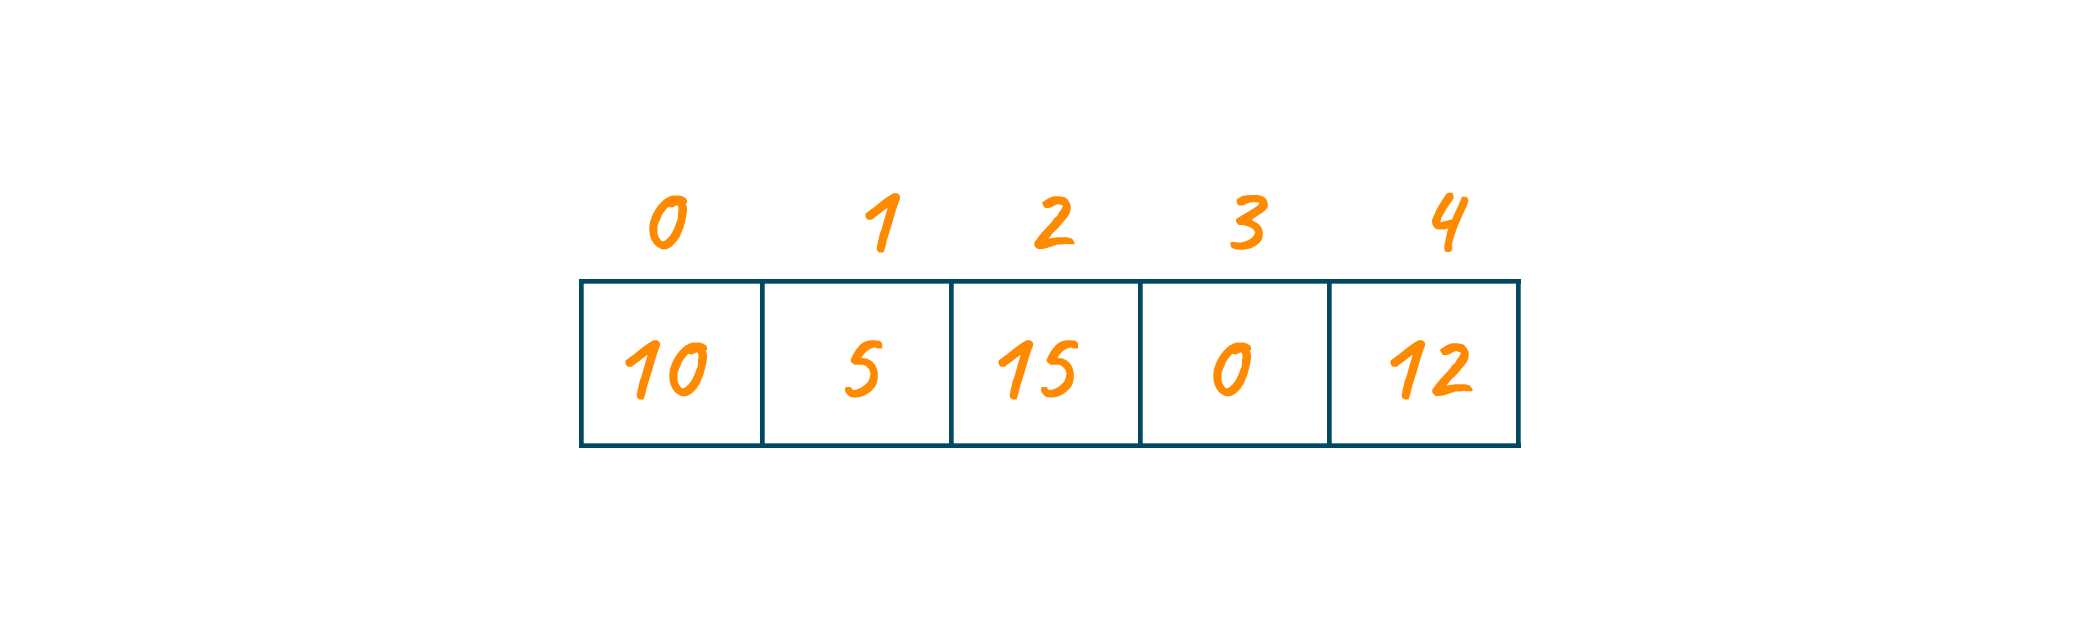 Initial array with elements 10,5,15,0 and 12